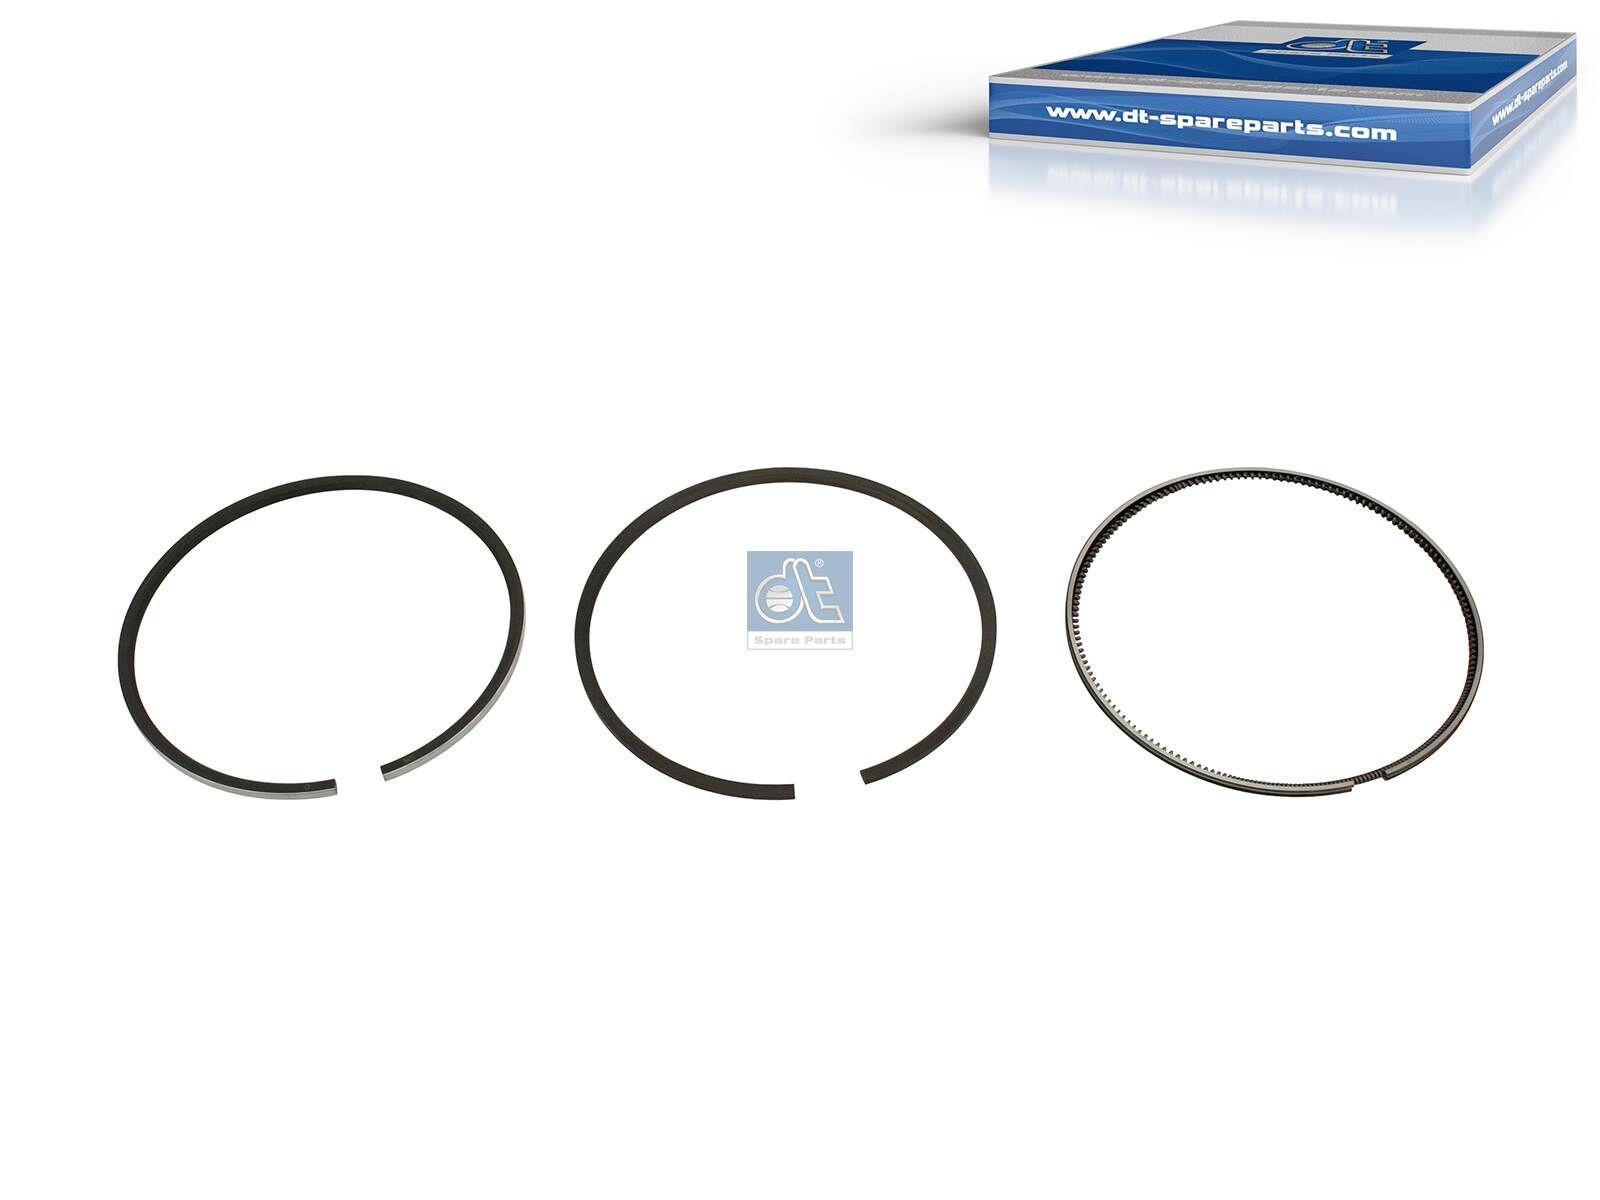 038 73 N0 DT Spare Parts 131mm Piston Ring Set 2.90125 buy